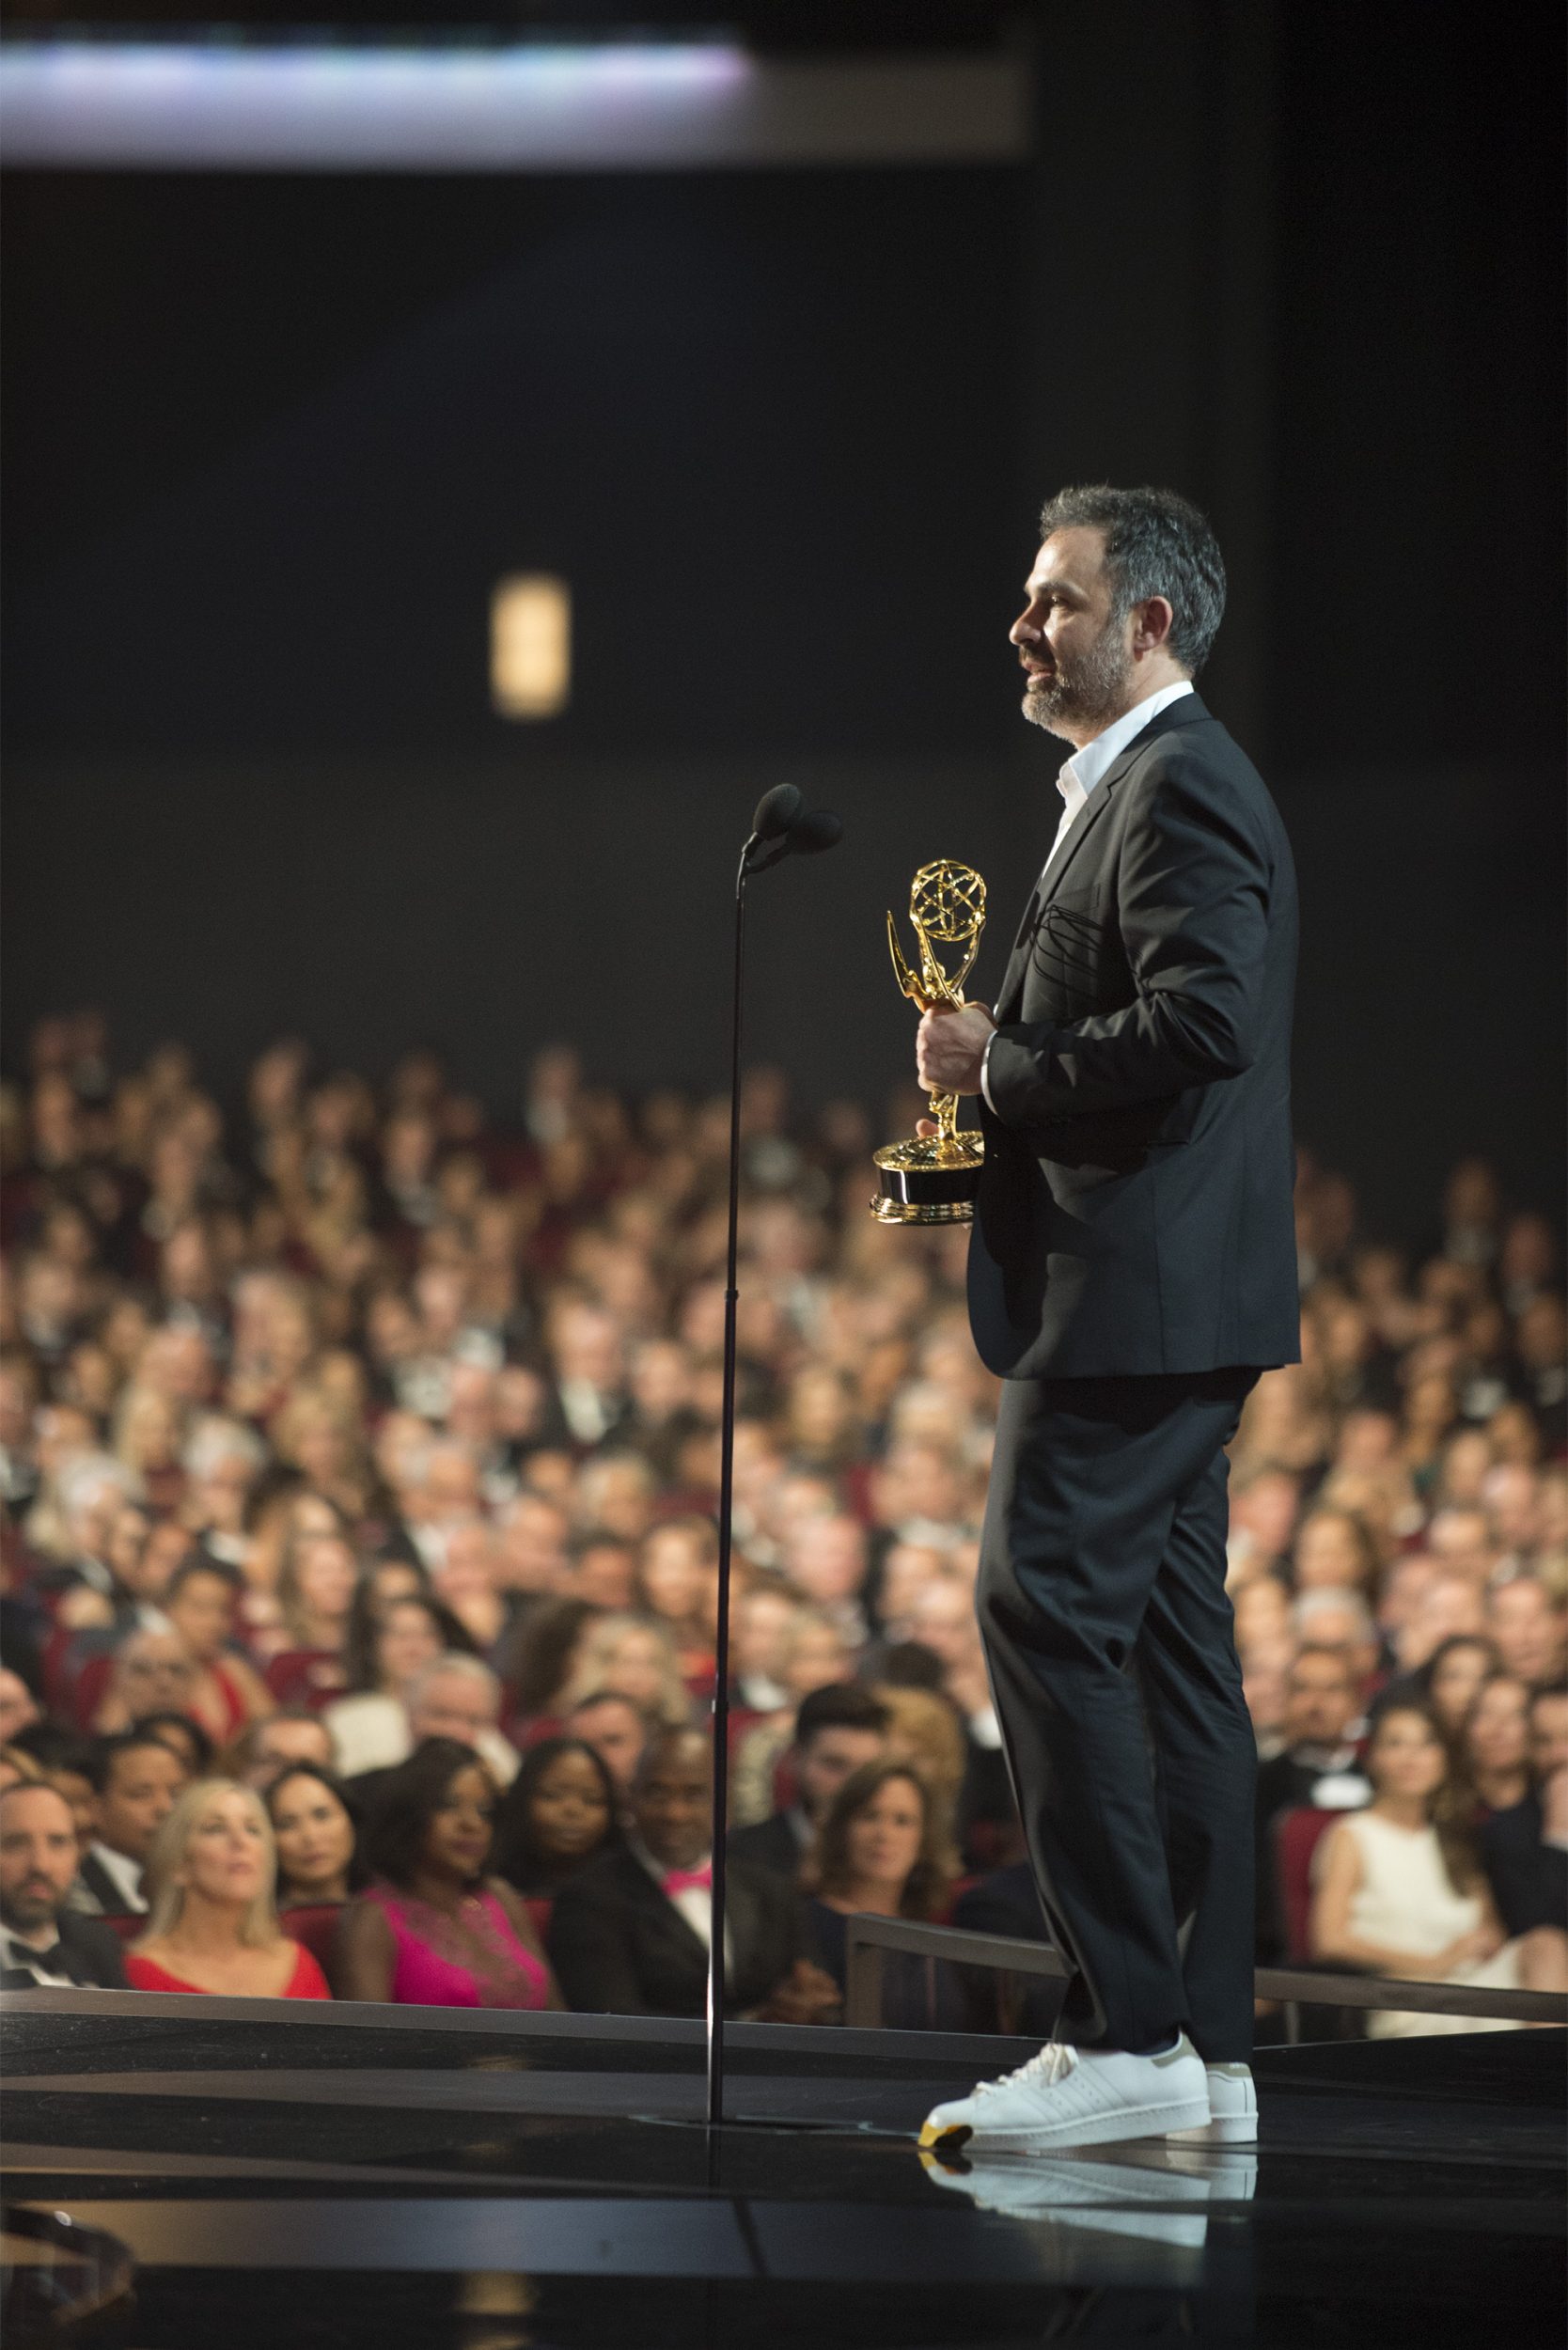 THE 68TH EMMY(r) AWARDS - “The 68th Emmy Awards” broadcasts live from The Microsoft Theater in Los Angeles, Sunday, September 18 (7:00-11:00 p.m. EDT/4:00-8:00 p.m. PDT), on ABC and is hosted by Jimmy Kimmel. (ABC/Image Group LA) D.V. DEVINCENTIS